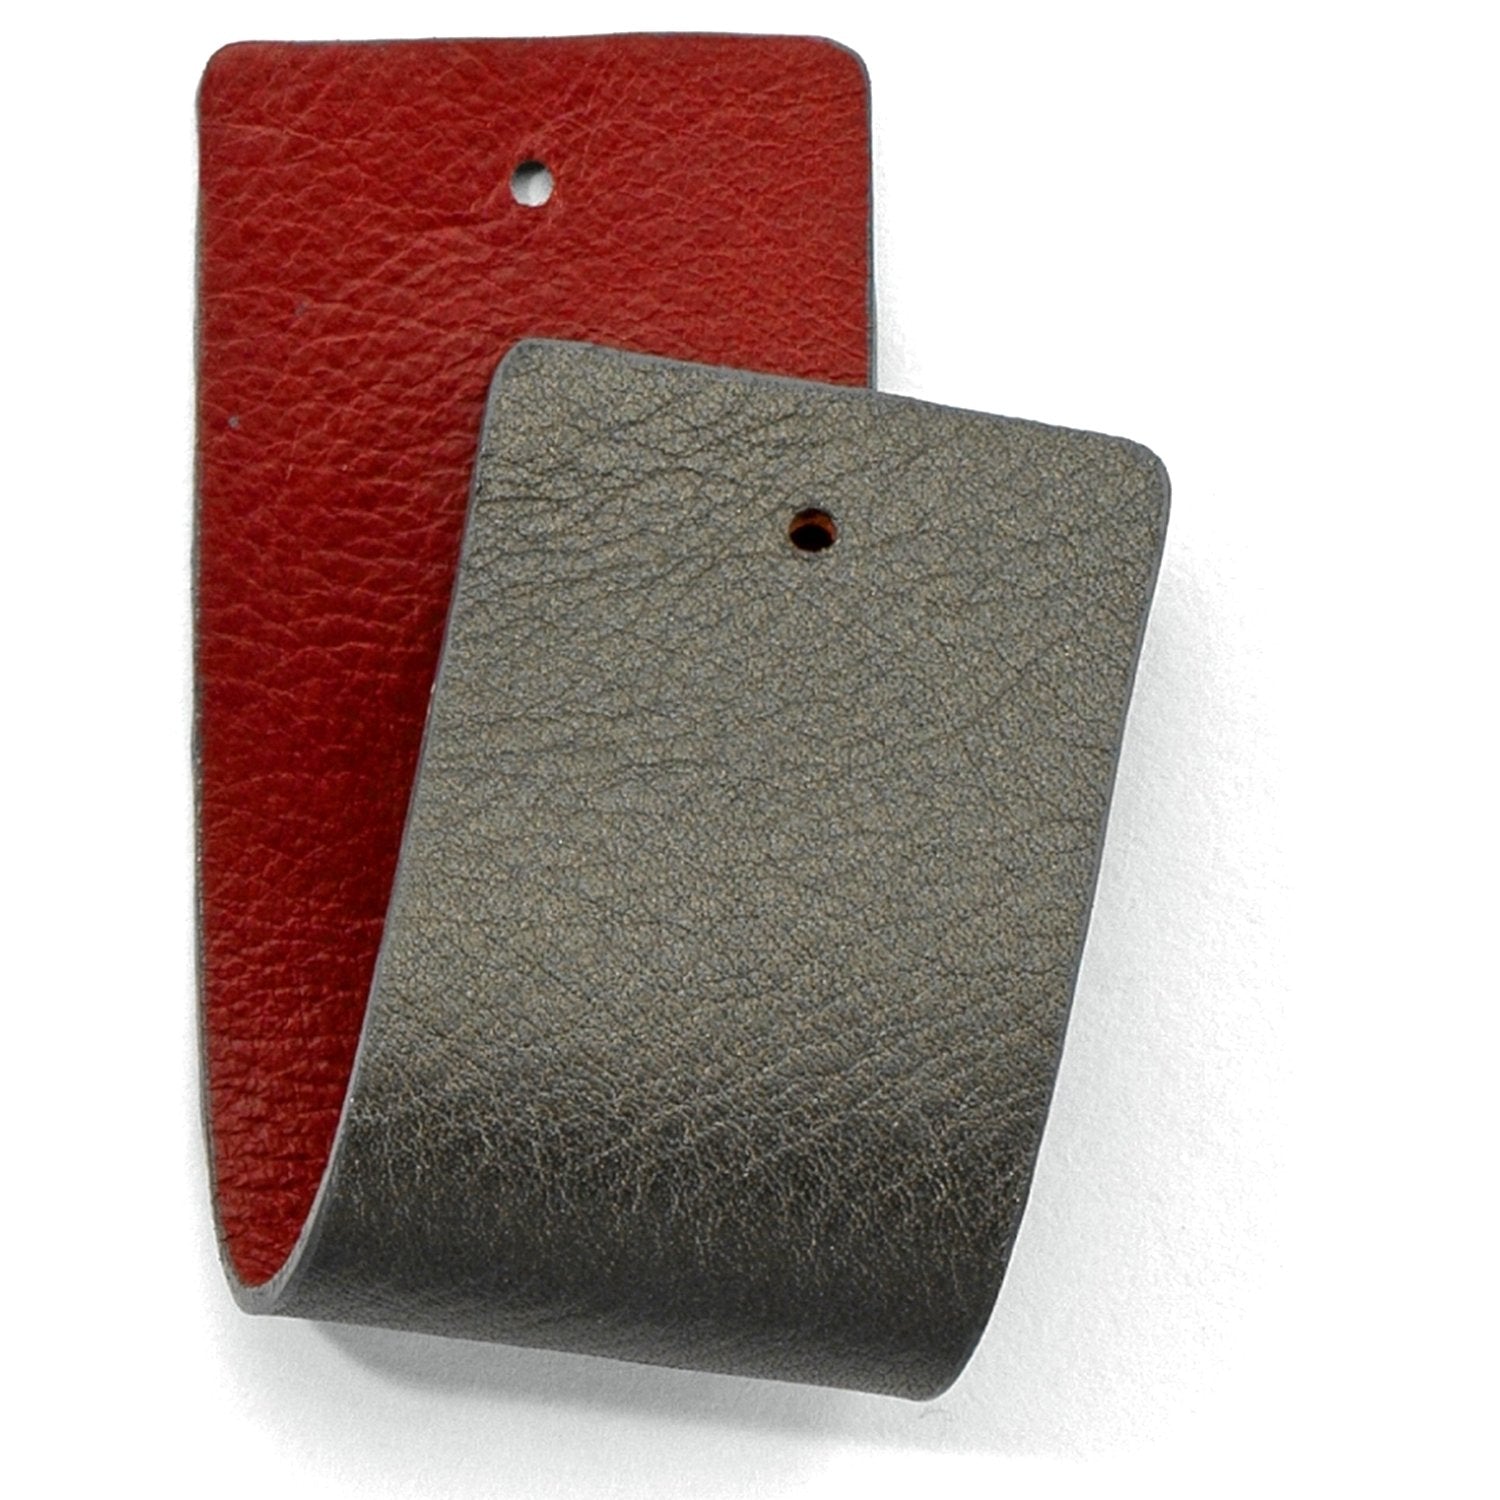 Christo Cuff Leather Strap Front View